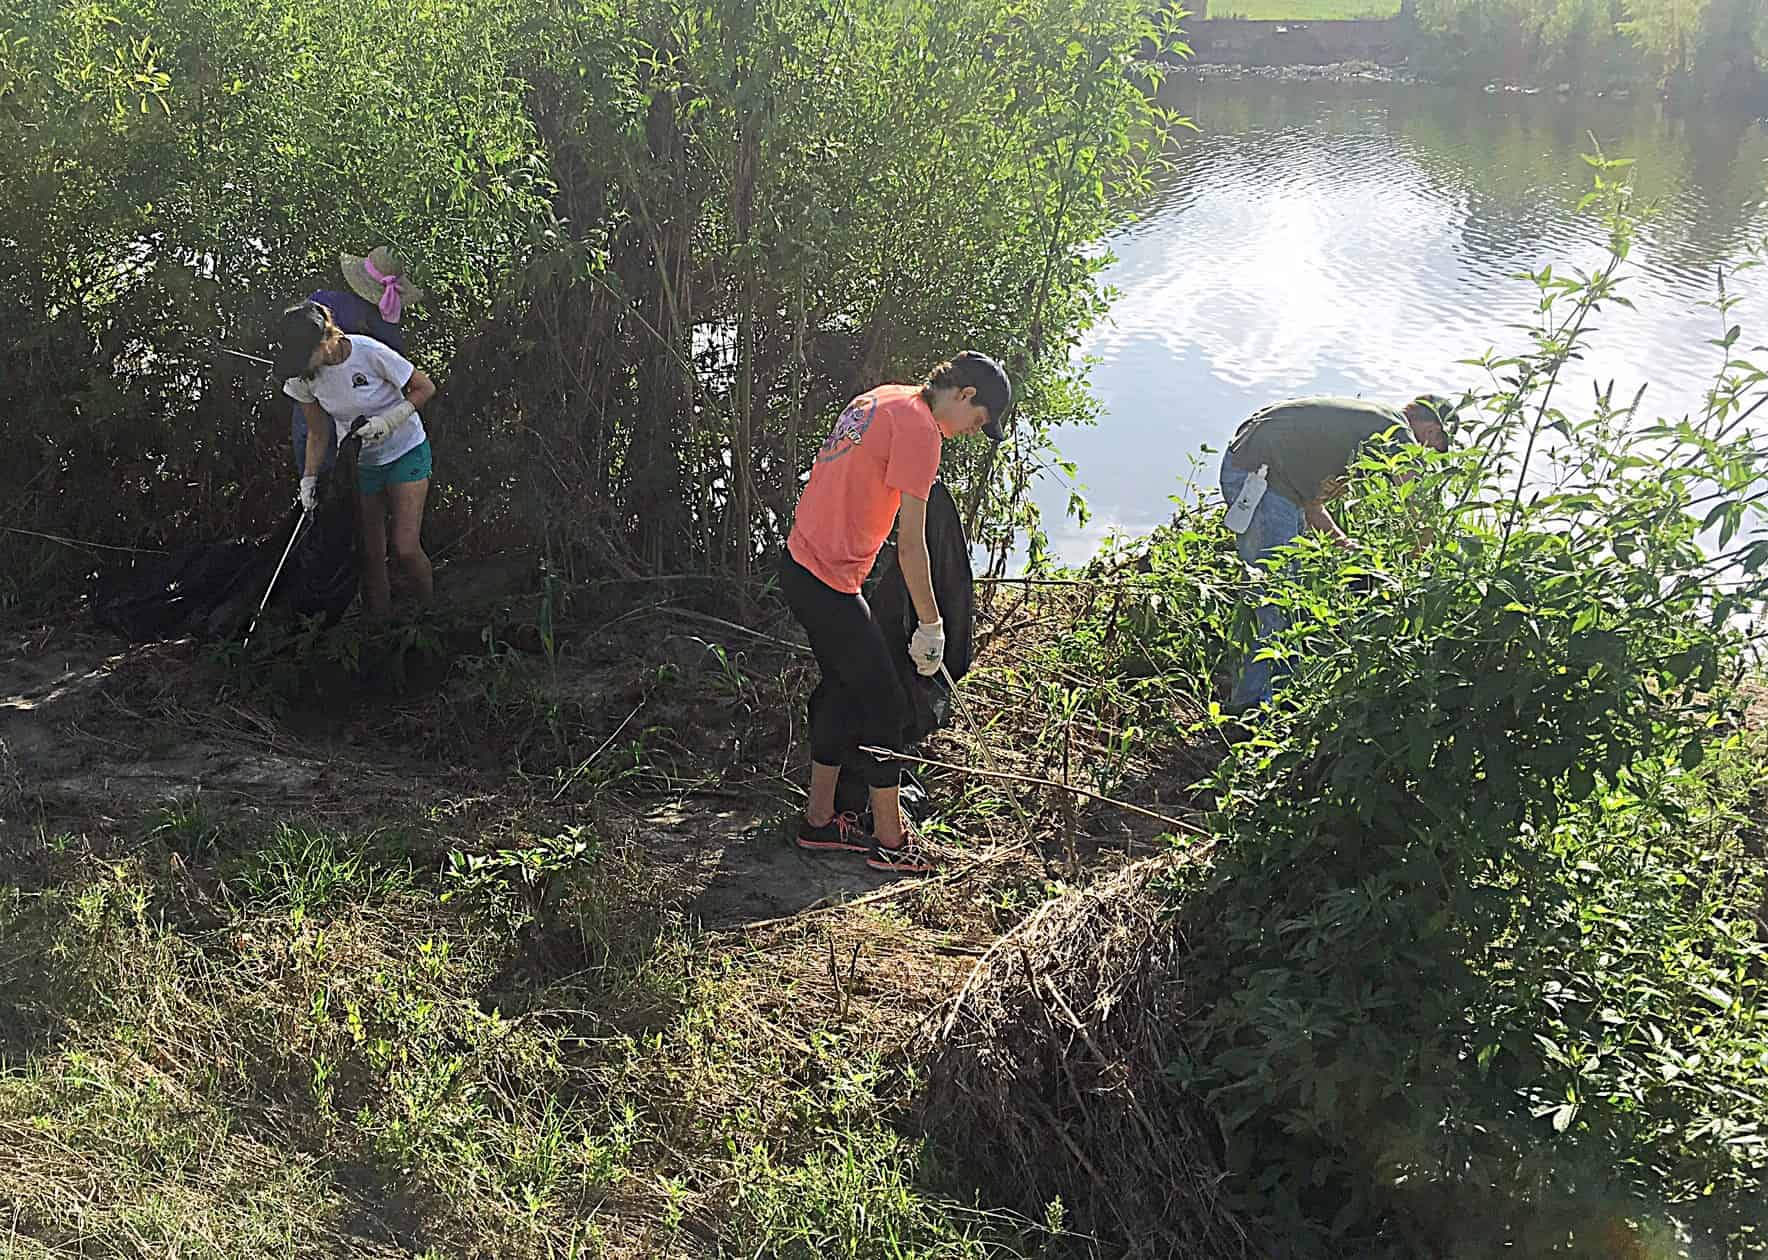 River Warrior volunteers taking part in post storm cleanup event along the river